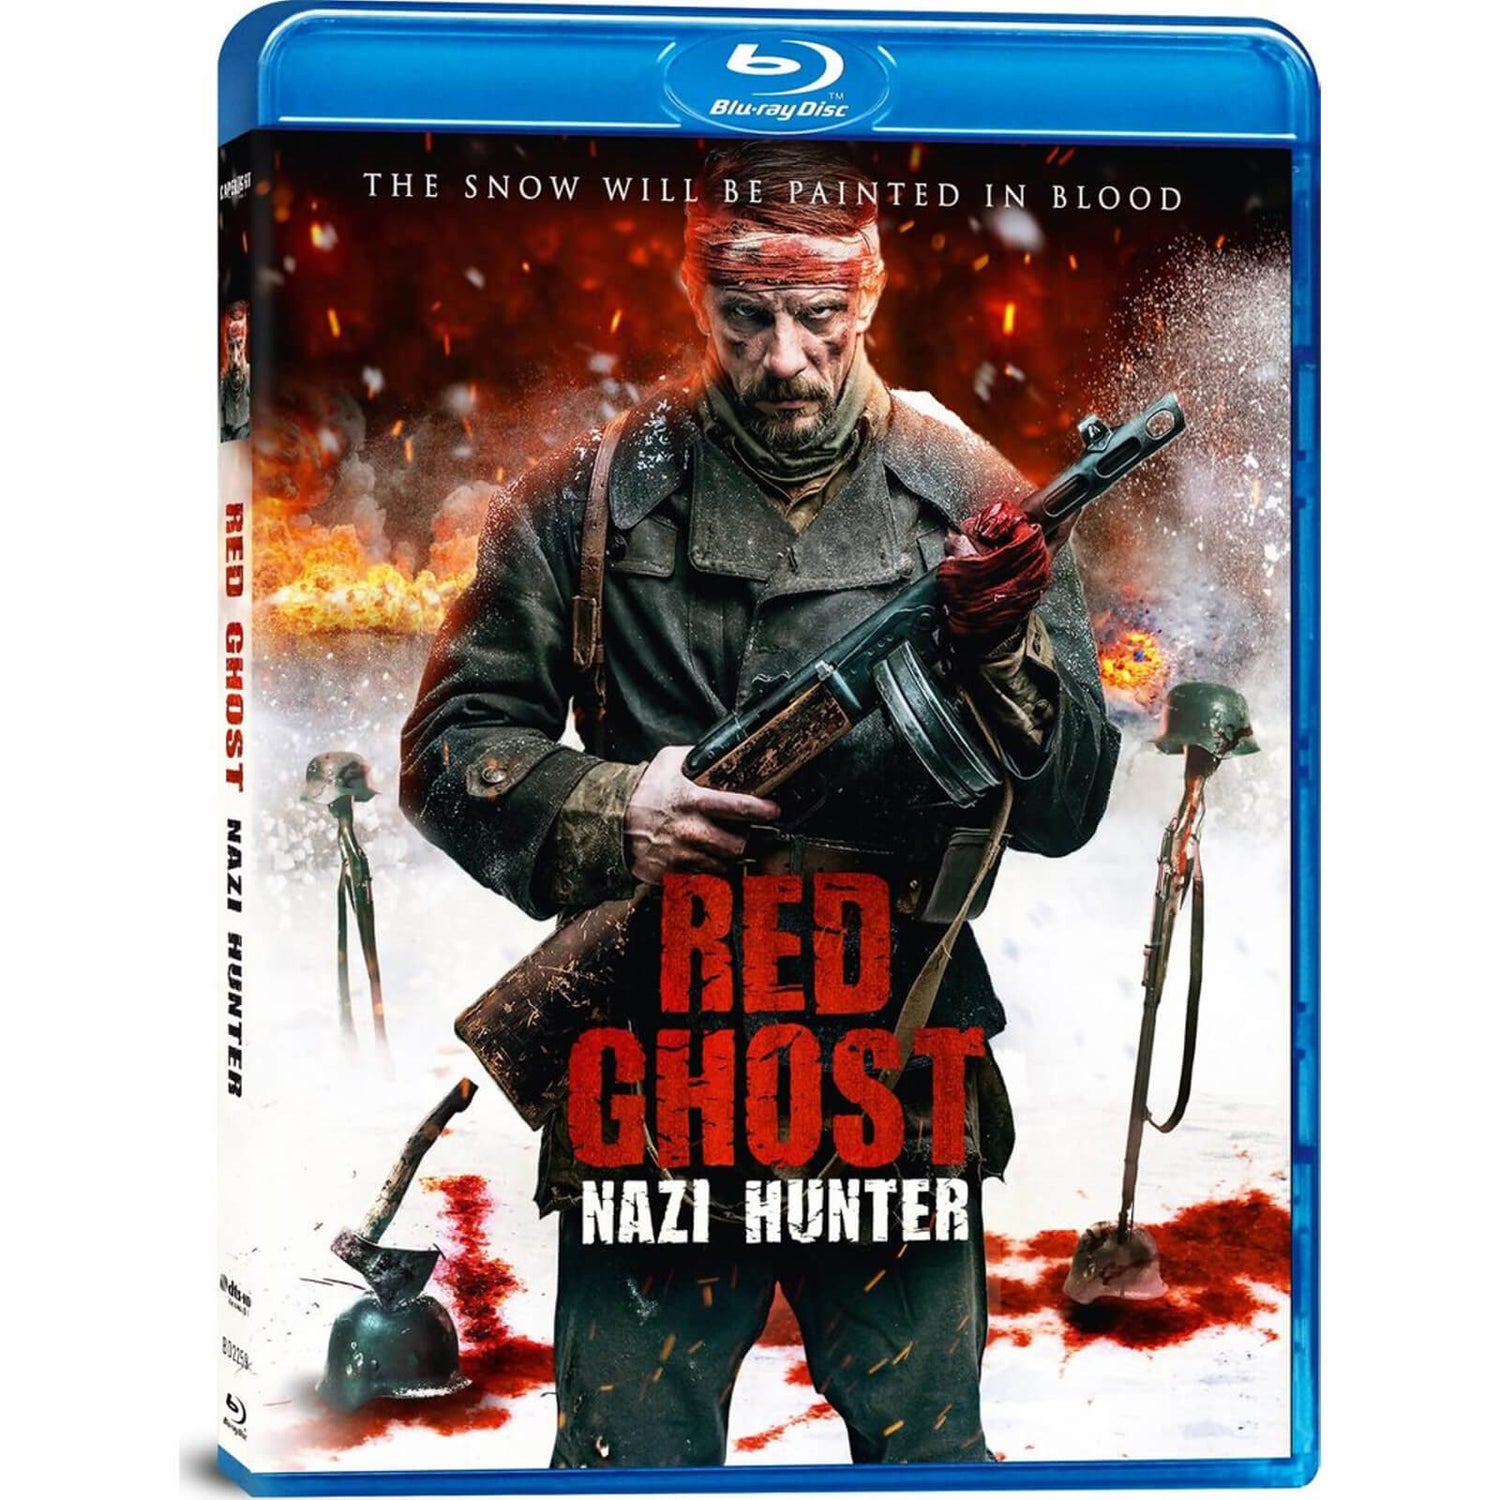 Red Ghost: Nazi Hunter (US Import)